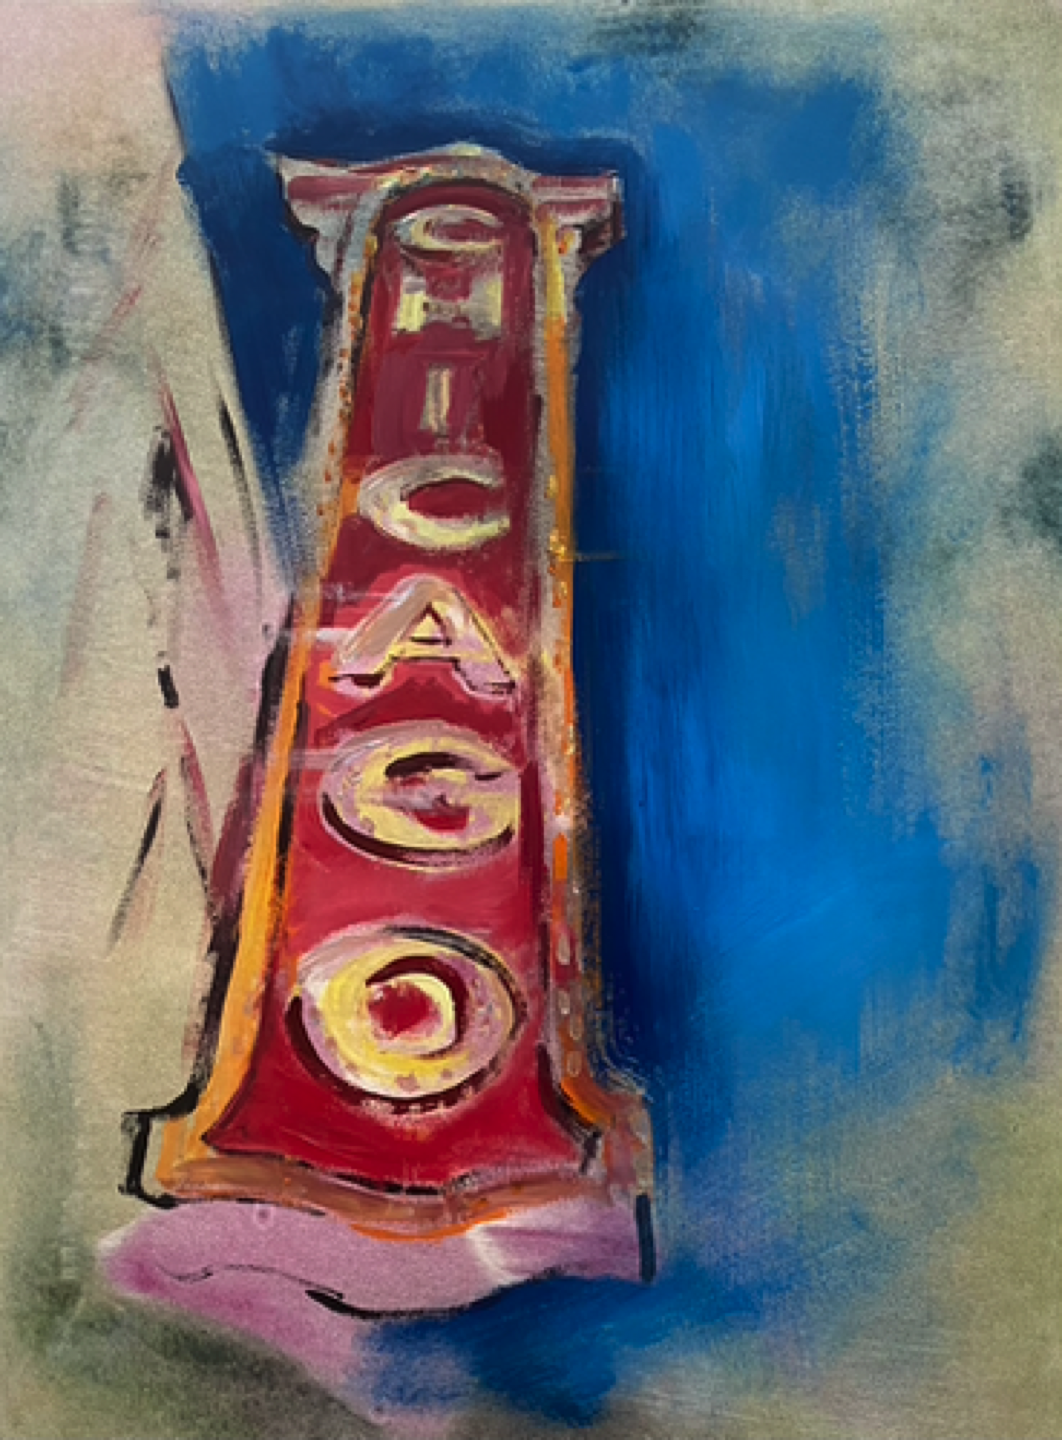 Gregg Chadwick
Vantage Point (Chicago Theatre) 
30"x22" gouache on paper 2021
Robyn Walter Collection, Illinois
Sold by Saatchi Art - August 2022